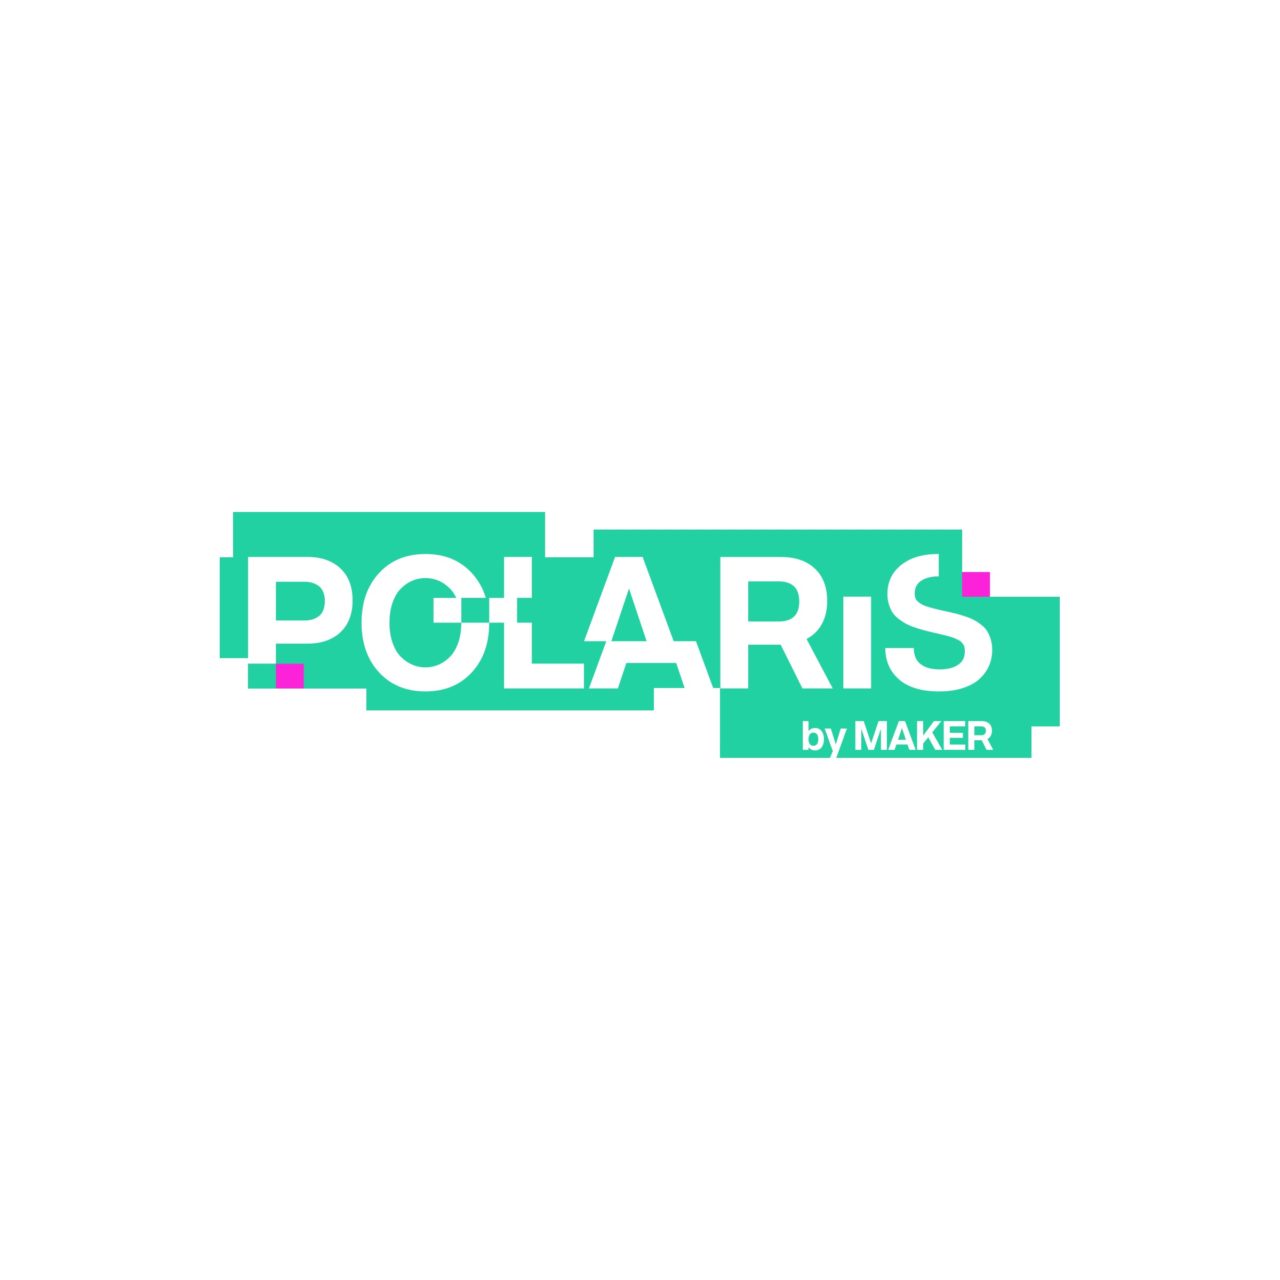 Maker Studios Relaunches Gaming and Comedy Brands, Polaris by Maker and The Station by Maker